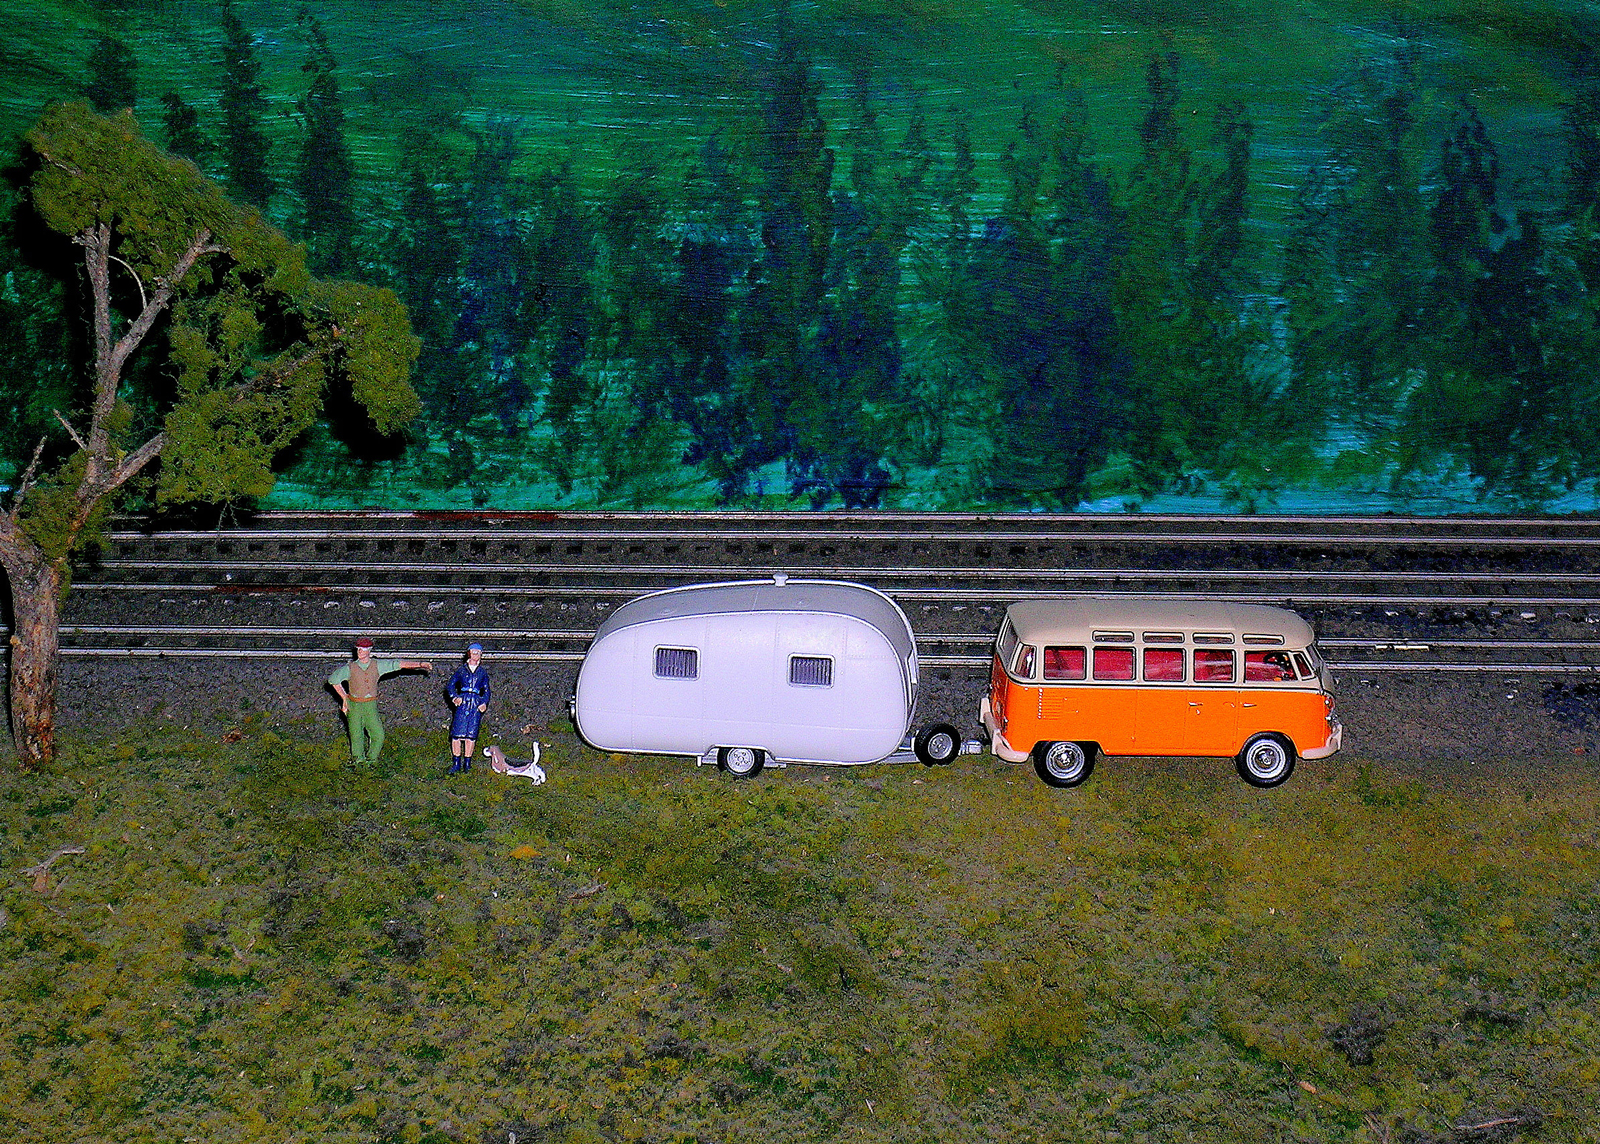 Campers